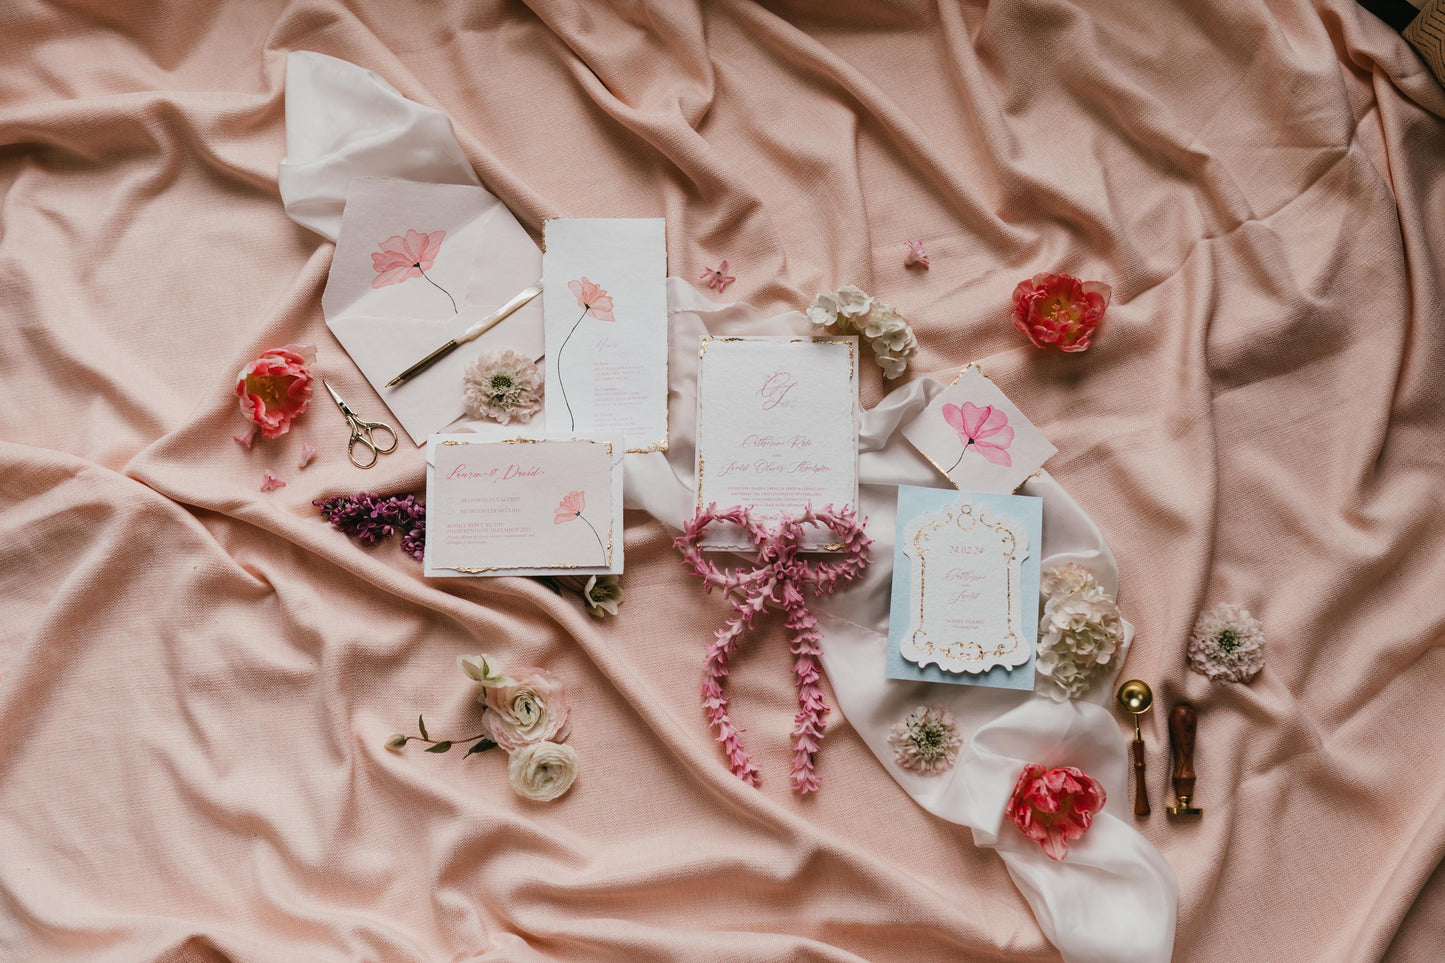 Romantically hand crafted wedding stationery for this Lover Era Wedding